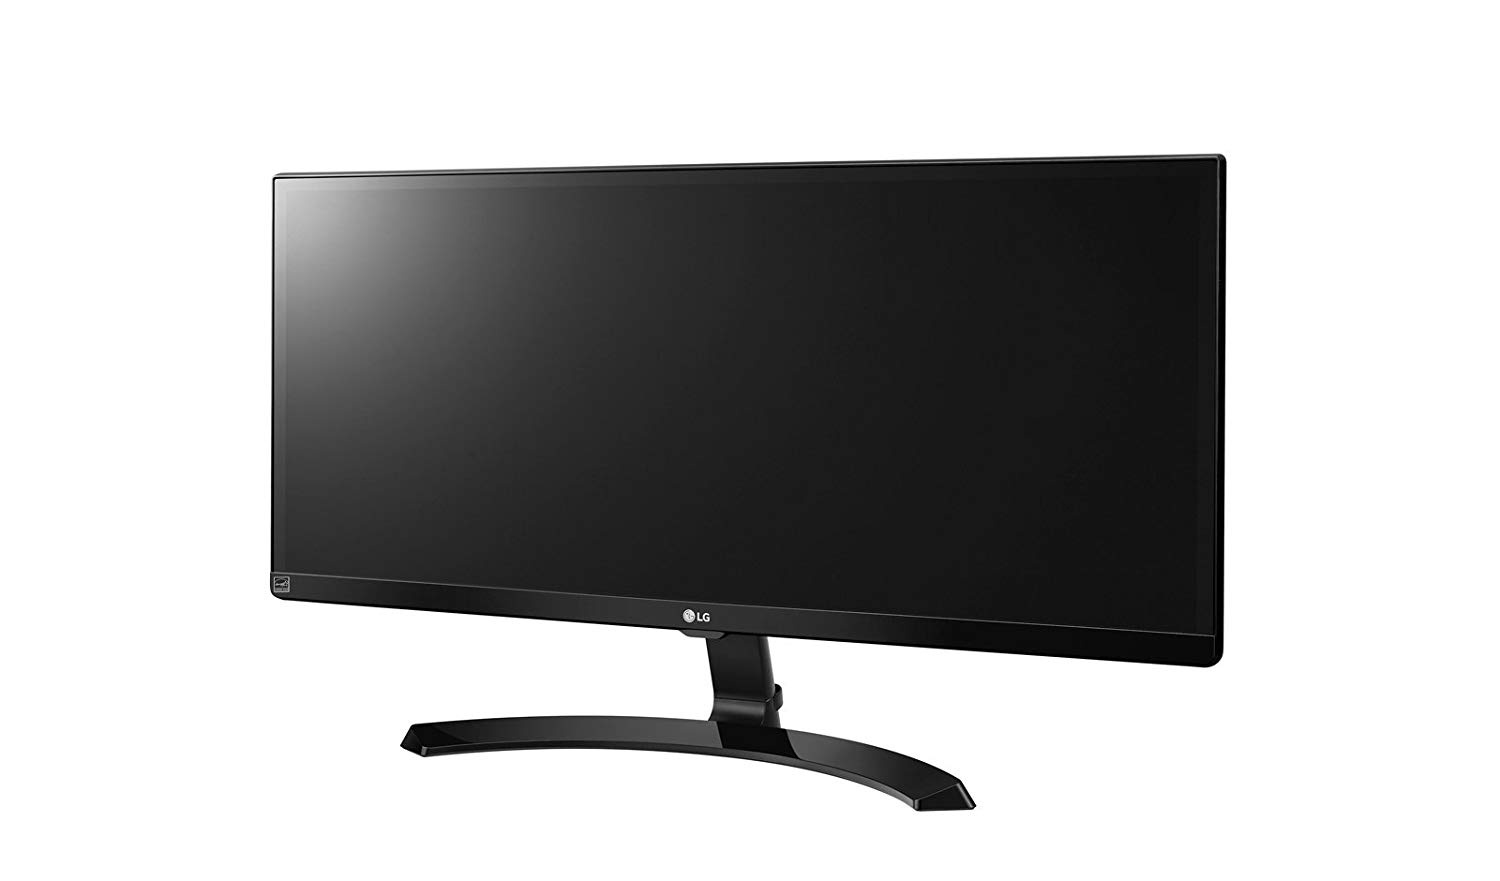 IPS 29" UltraWide LG 29UM59A LED Monitor with 75hz Refresh for $161.10